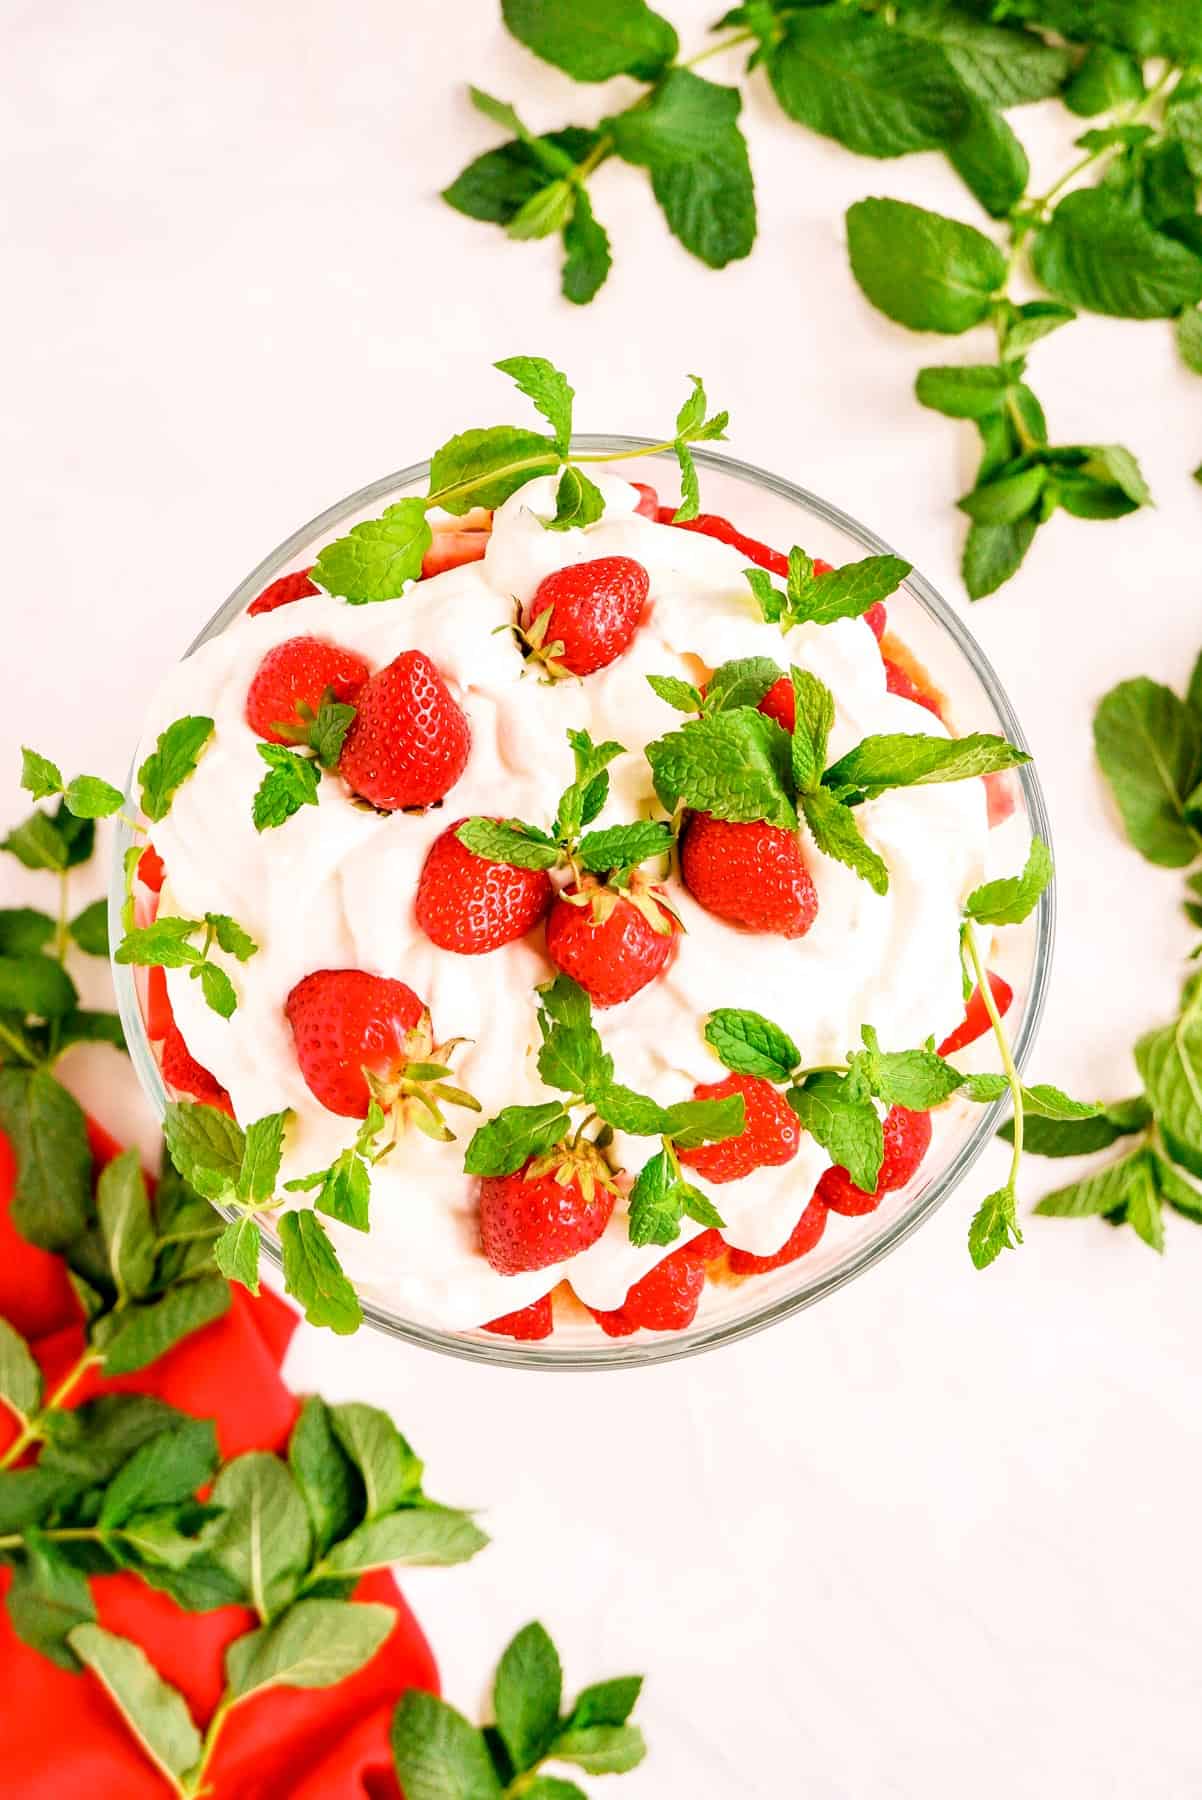 a trifle dish from fully garnished with strawberries and mint leaves on top of whipped cream.